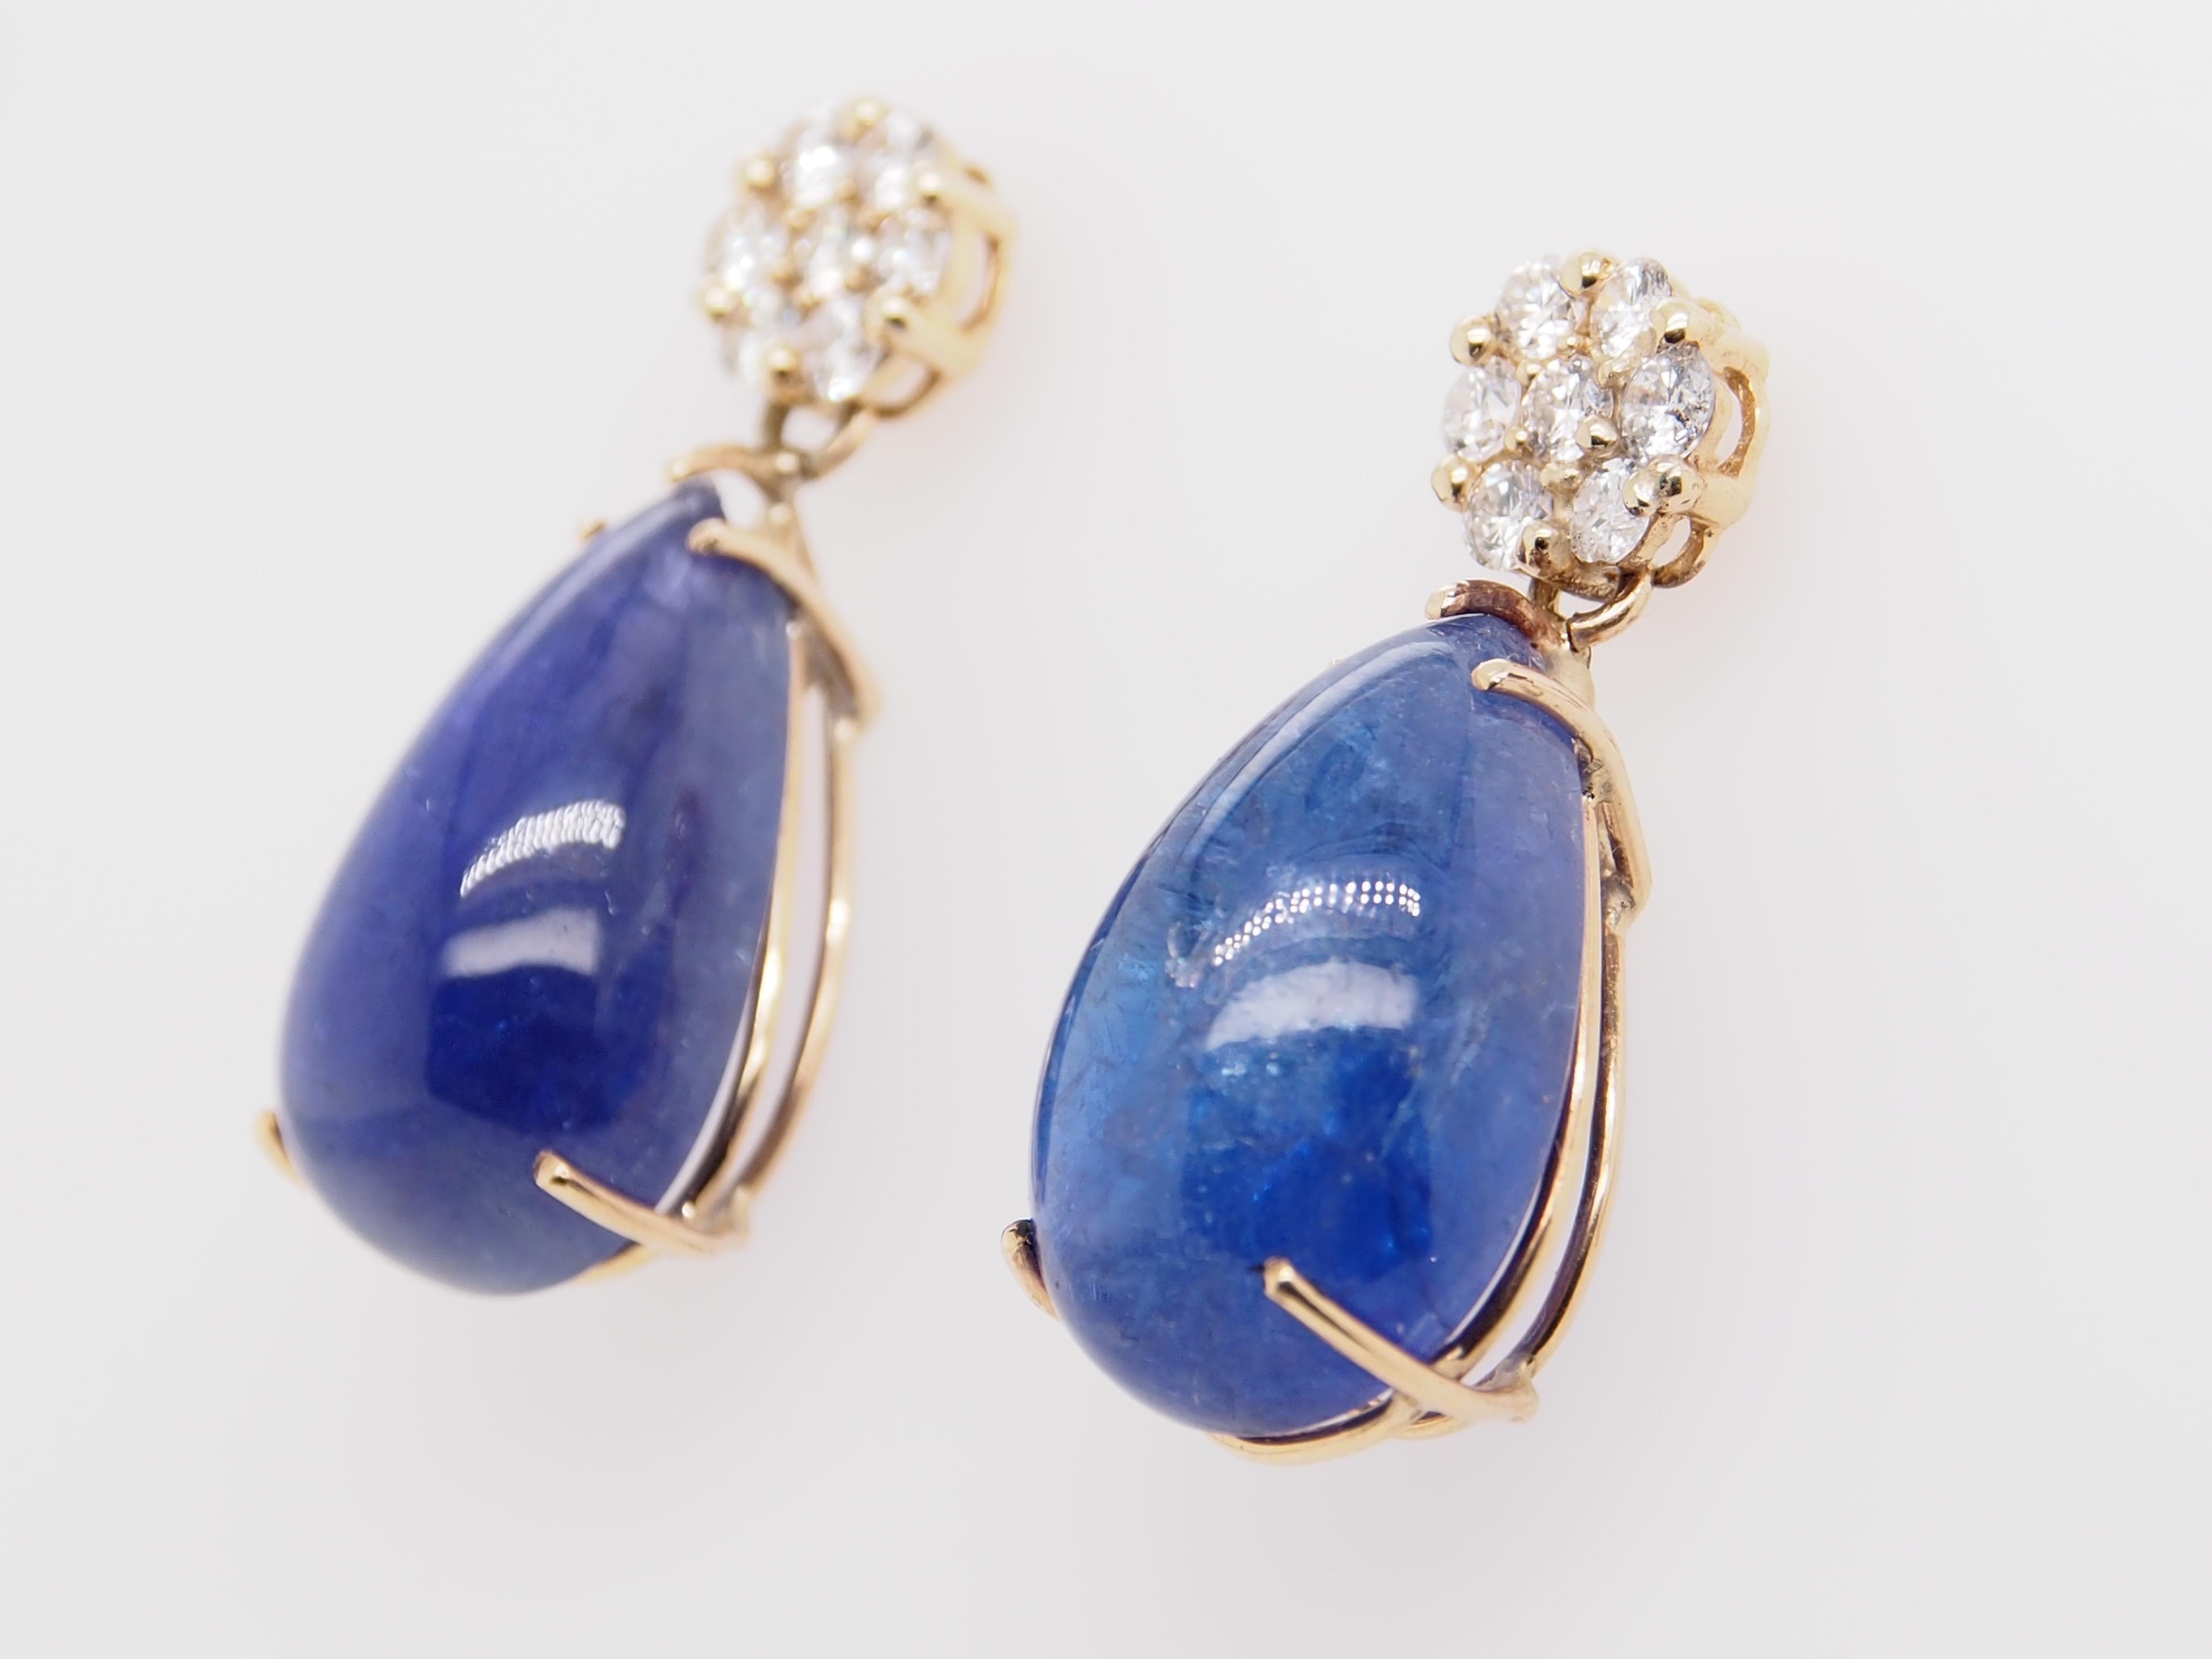 A stunning pair of 14K yellow gold earrings. A beautiful Tanzanite stone dangles from diamond flower cluster. Each Tanzanite measures 20.5x12.2x9, approximately 36 carat total weight. (14) Round Brilliant Cut diamonds G-H in color, VS-SI in clarity